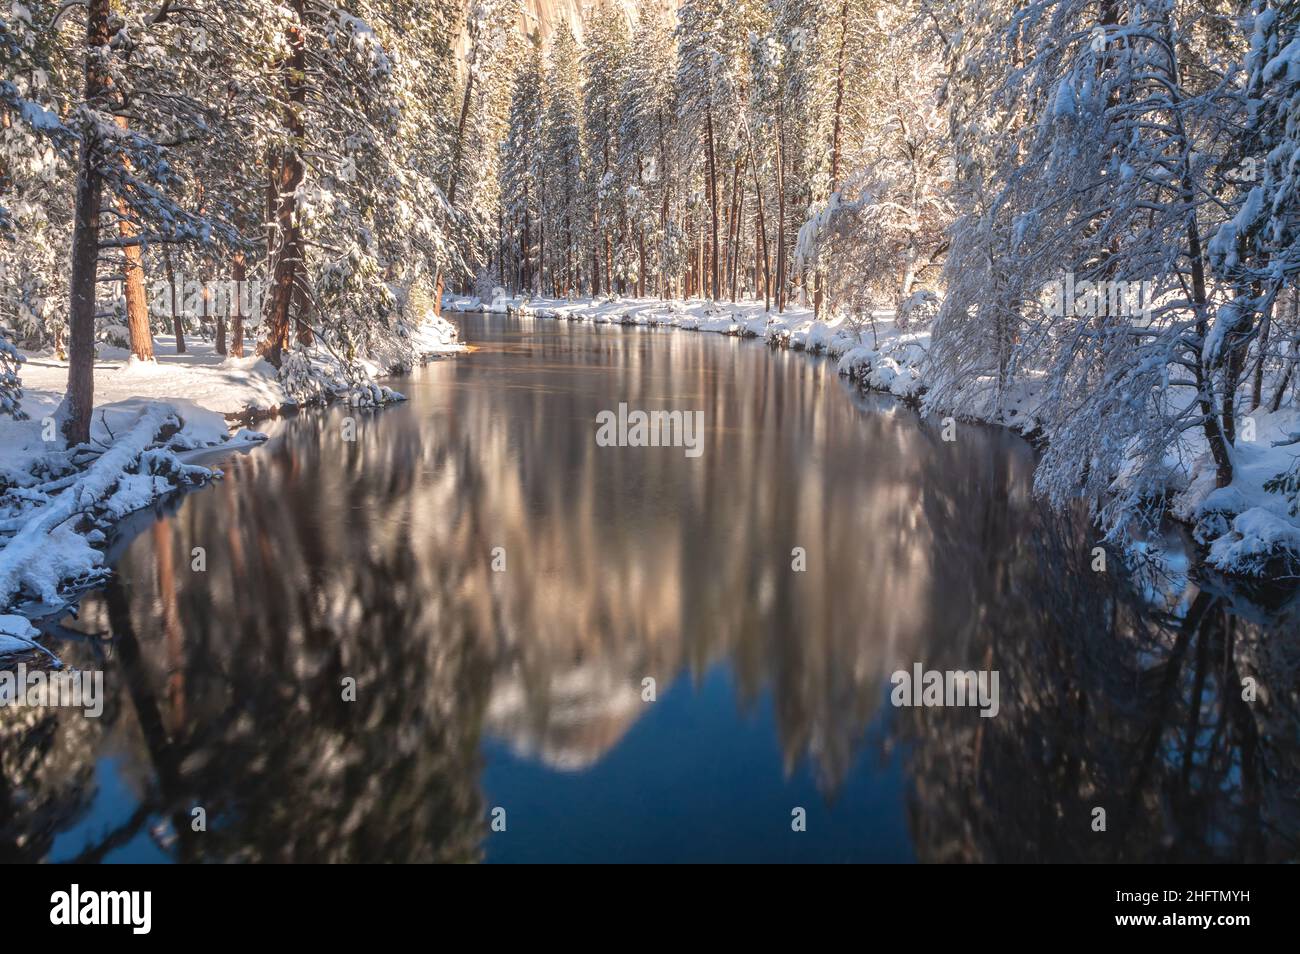 Snow-covered trees and their reflections on the Merced River in Yosemite National Park, California, USA. Stock Photo